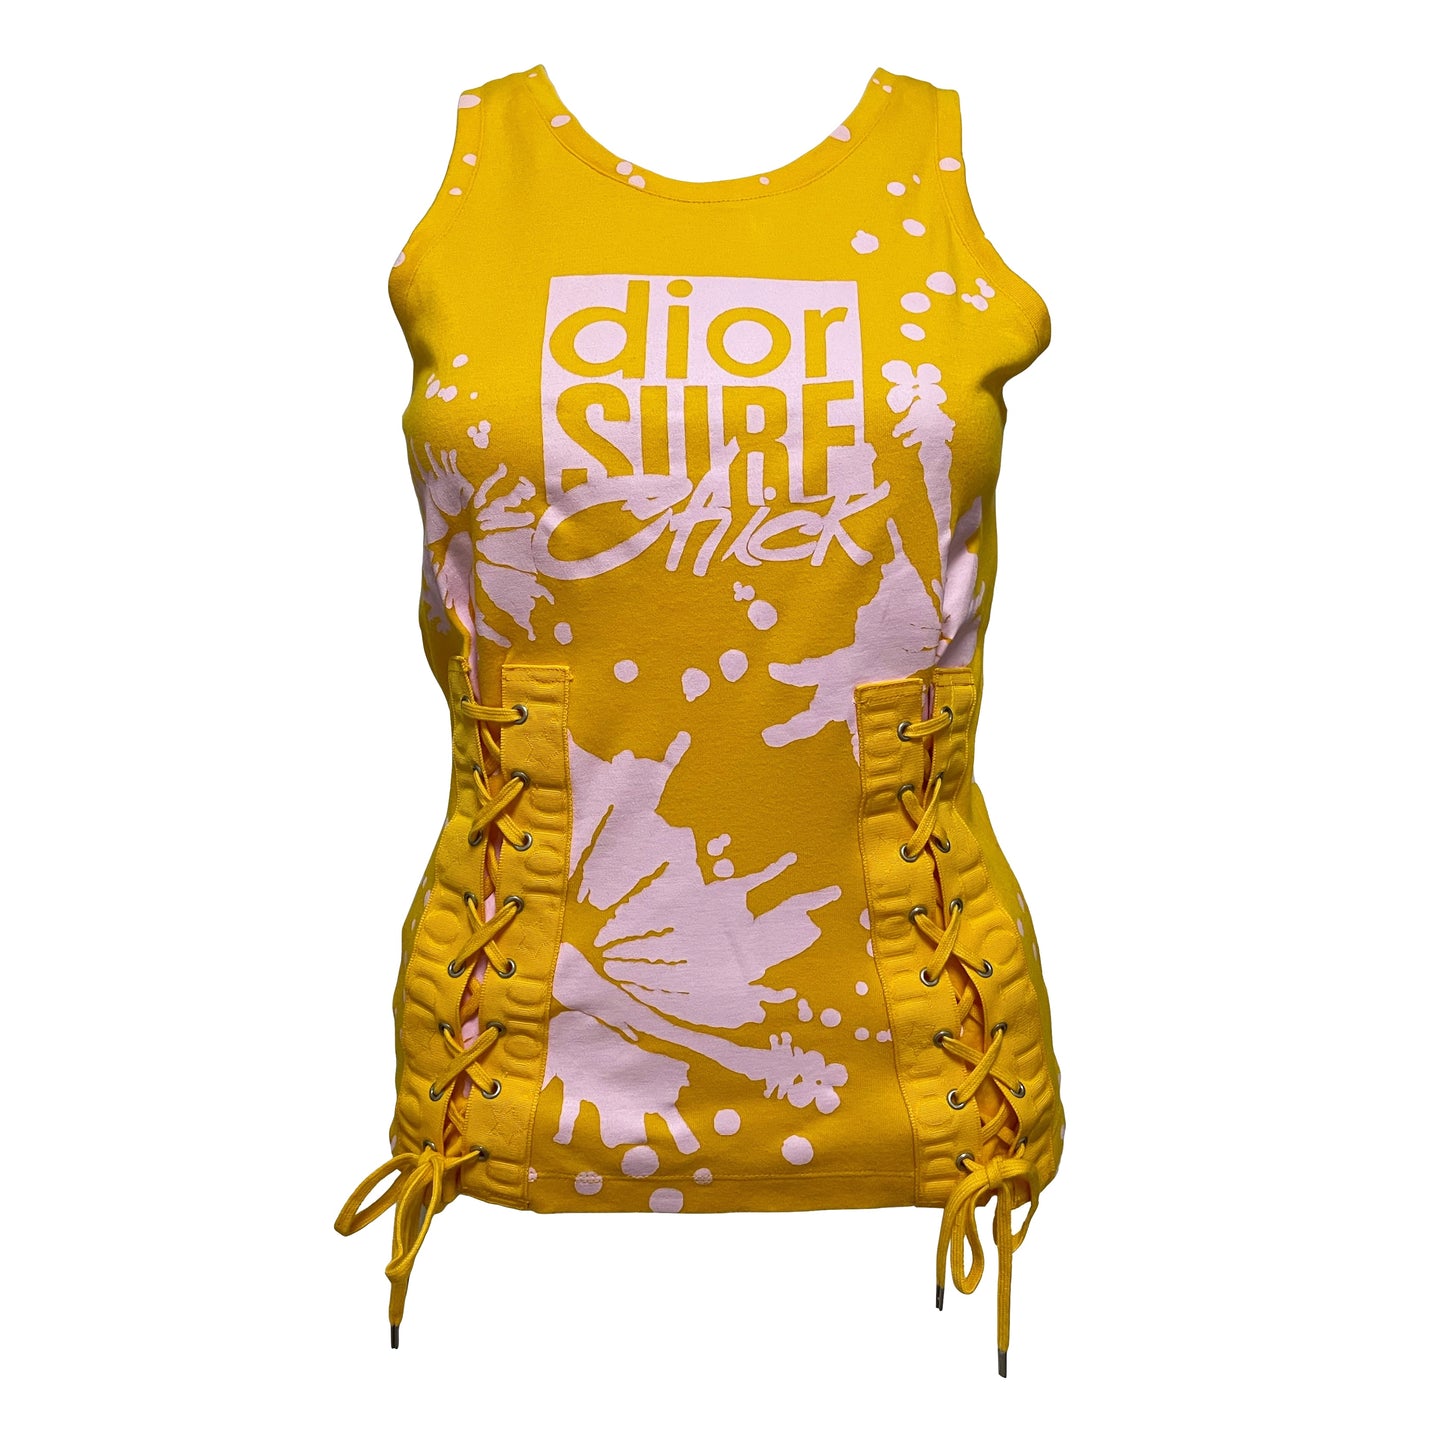 CHRISTIAN DIOR Spring Summer 2004 Surf Chick Laced Up Tank Top